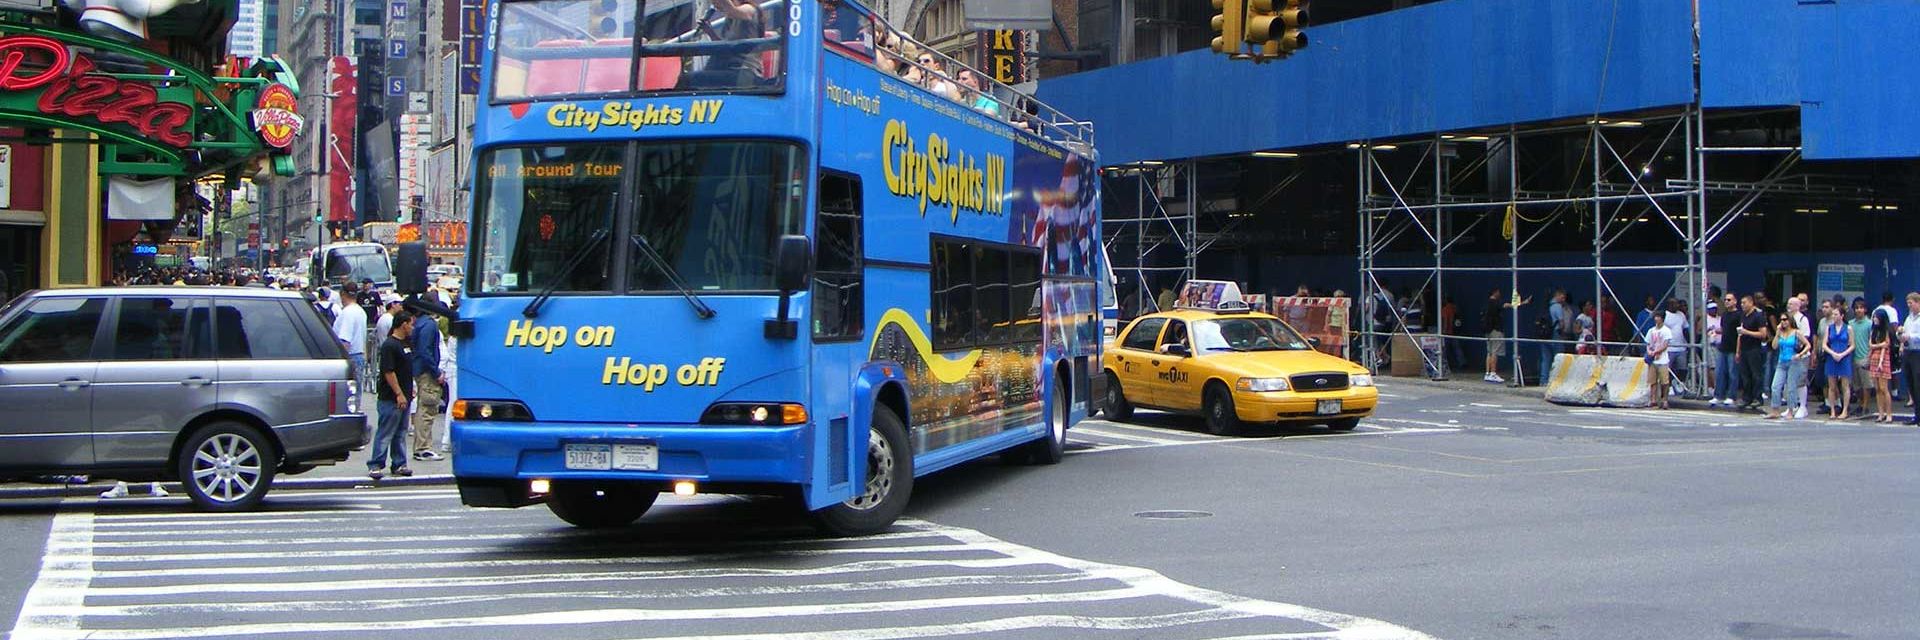 CitySightsNY - New York Sightseeing Tours and Attractions